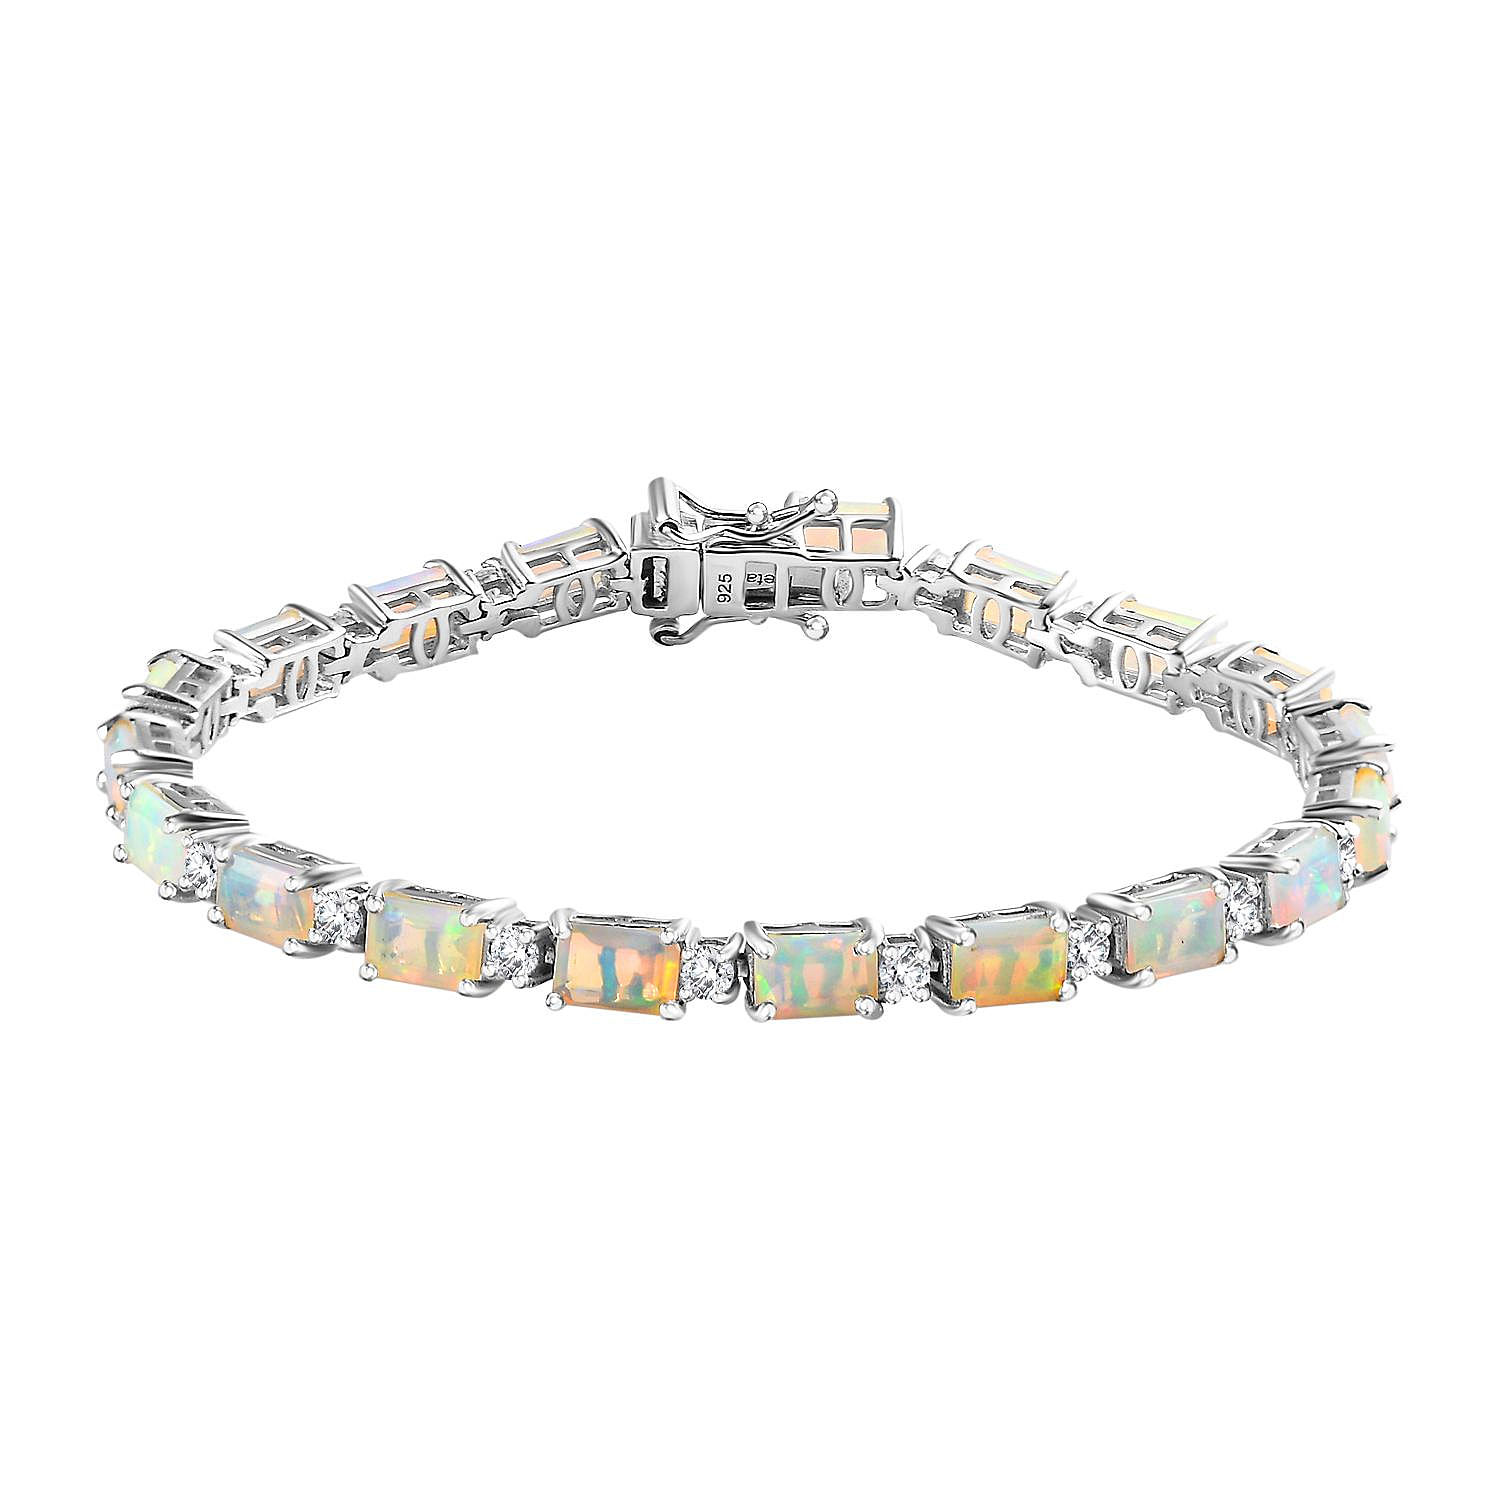 Ethiopian Welo Opal & Natural Zircon Tennis Bracelet (Size - 7) in Platinum Overlay Sterling Silver 7.41 Ct, Silver Wt. 11.25 Gms